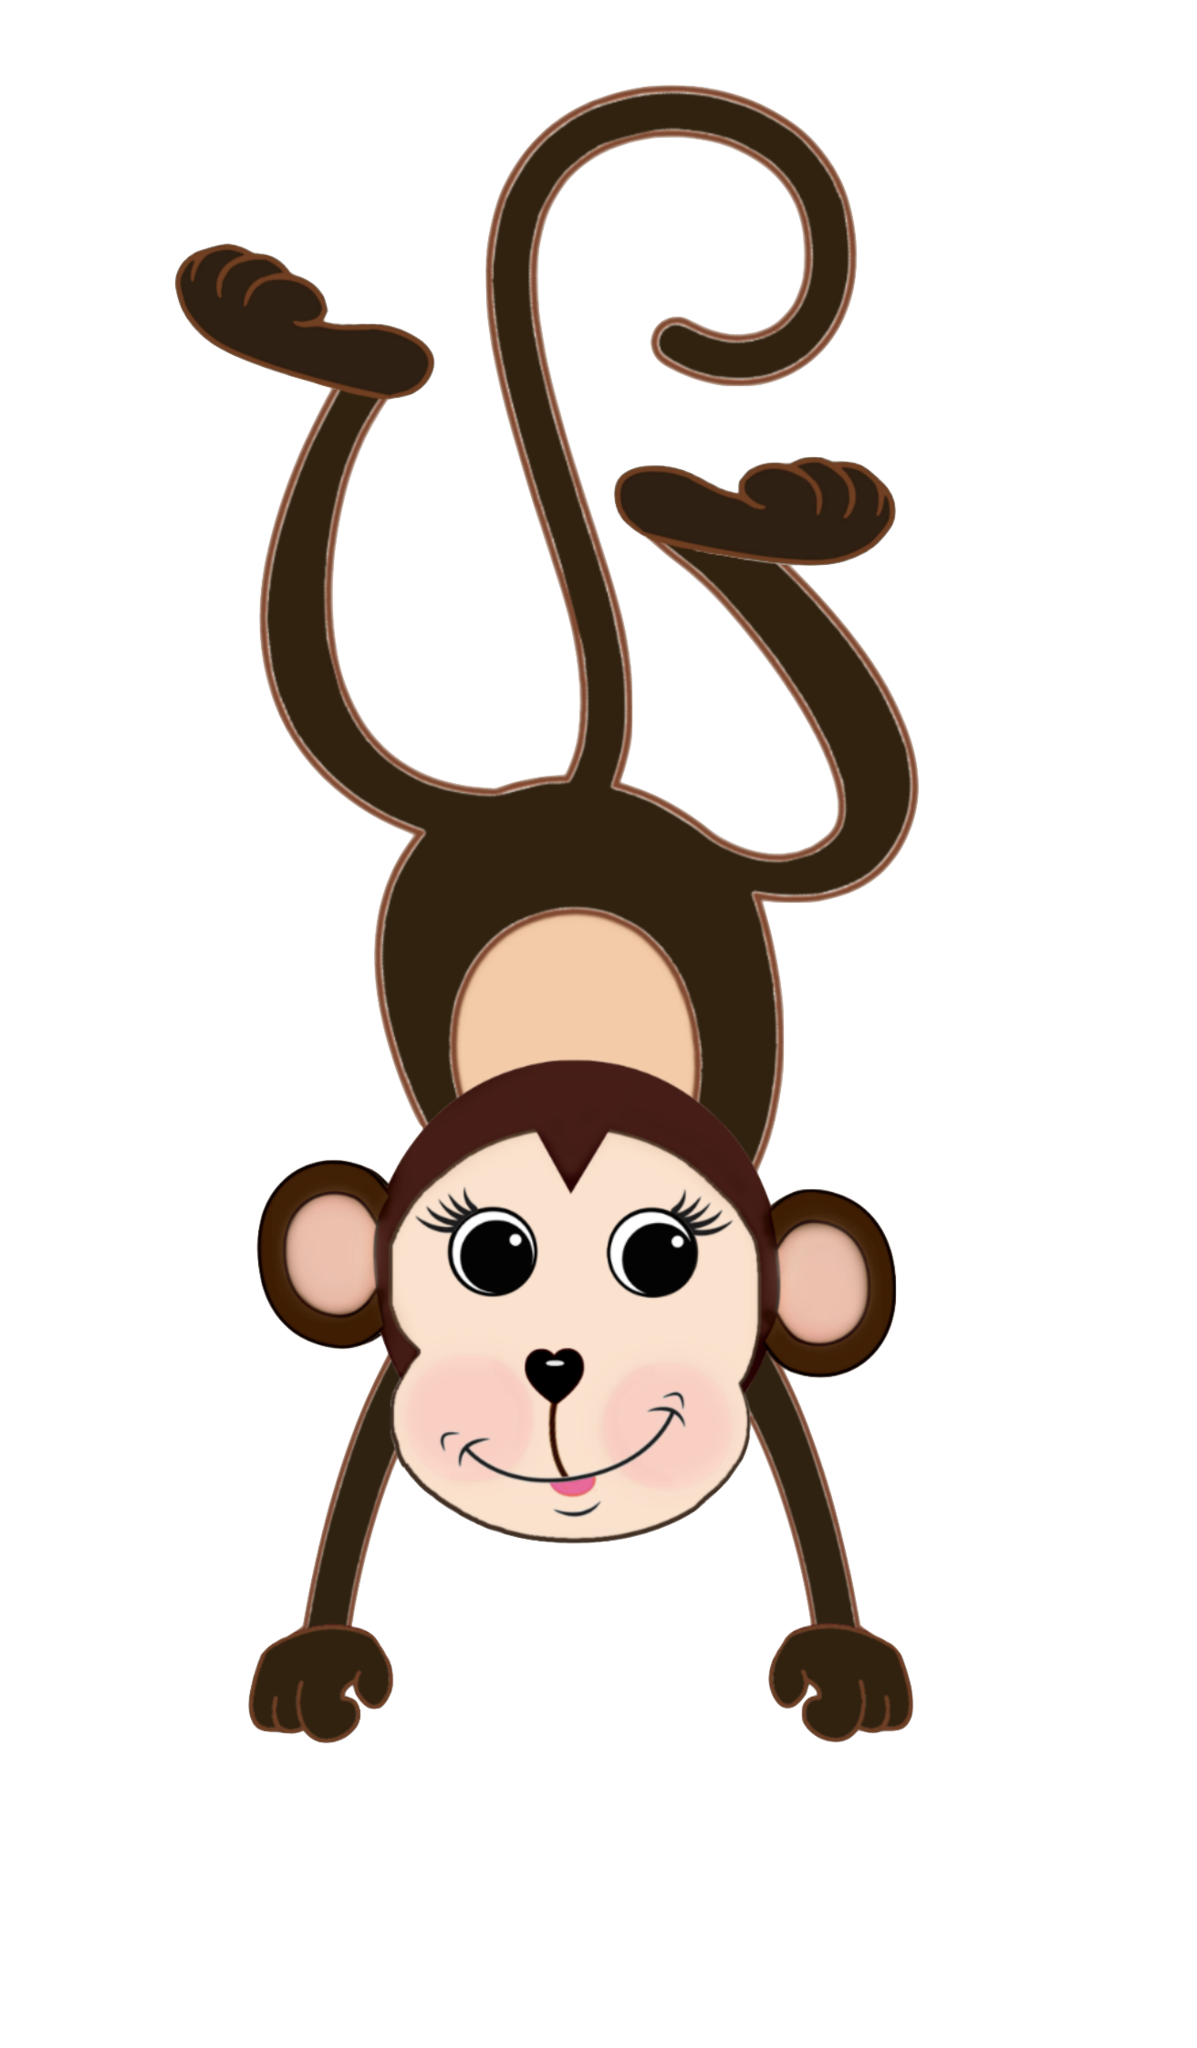 Monkey Girl Hanging by Tail - PNG Clip Art